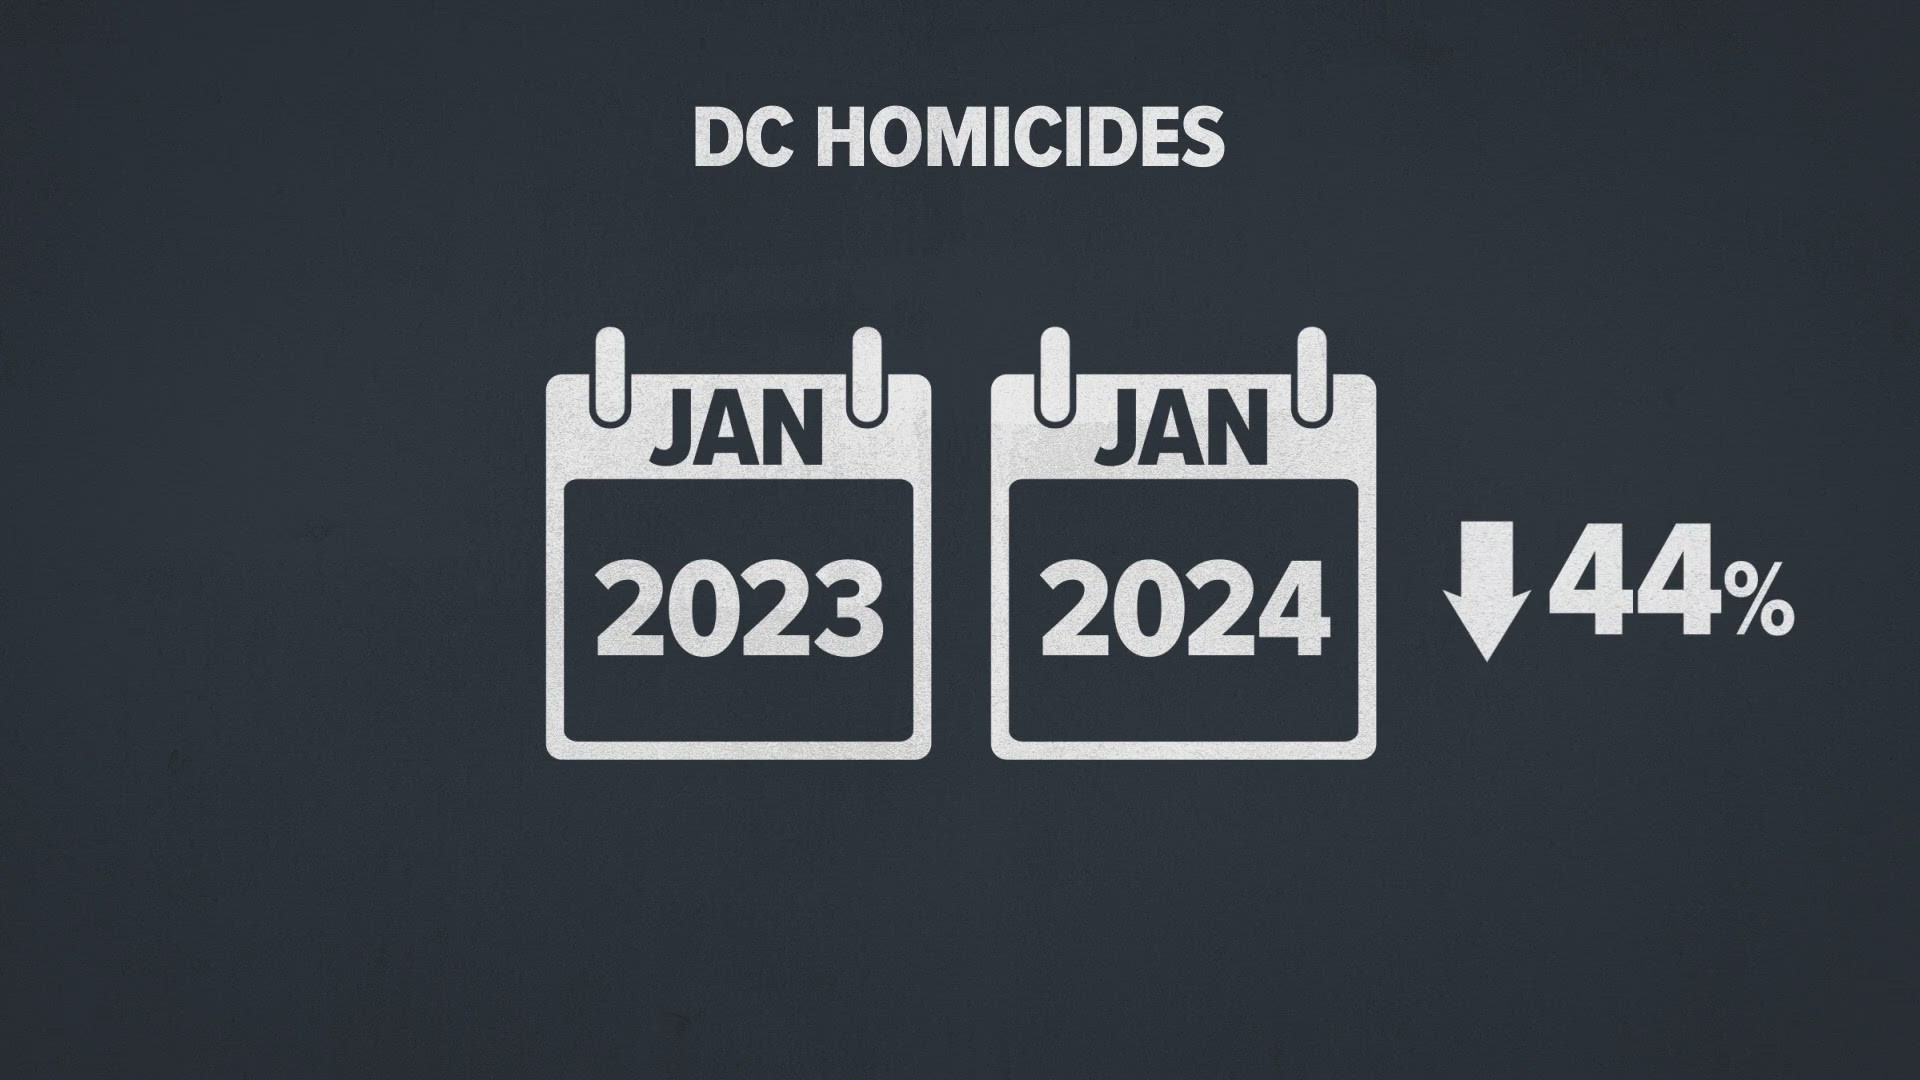 WUSA9 reviewed crime data from DC police that shows violent crime and property crimes are down in January year-over-year.